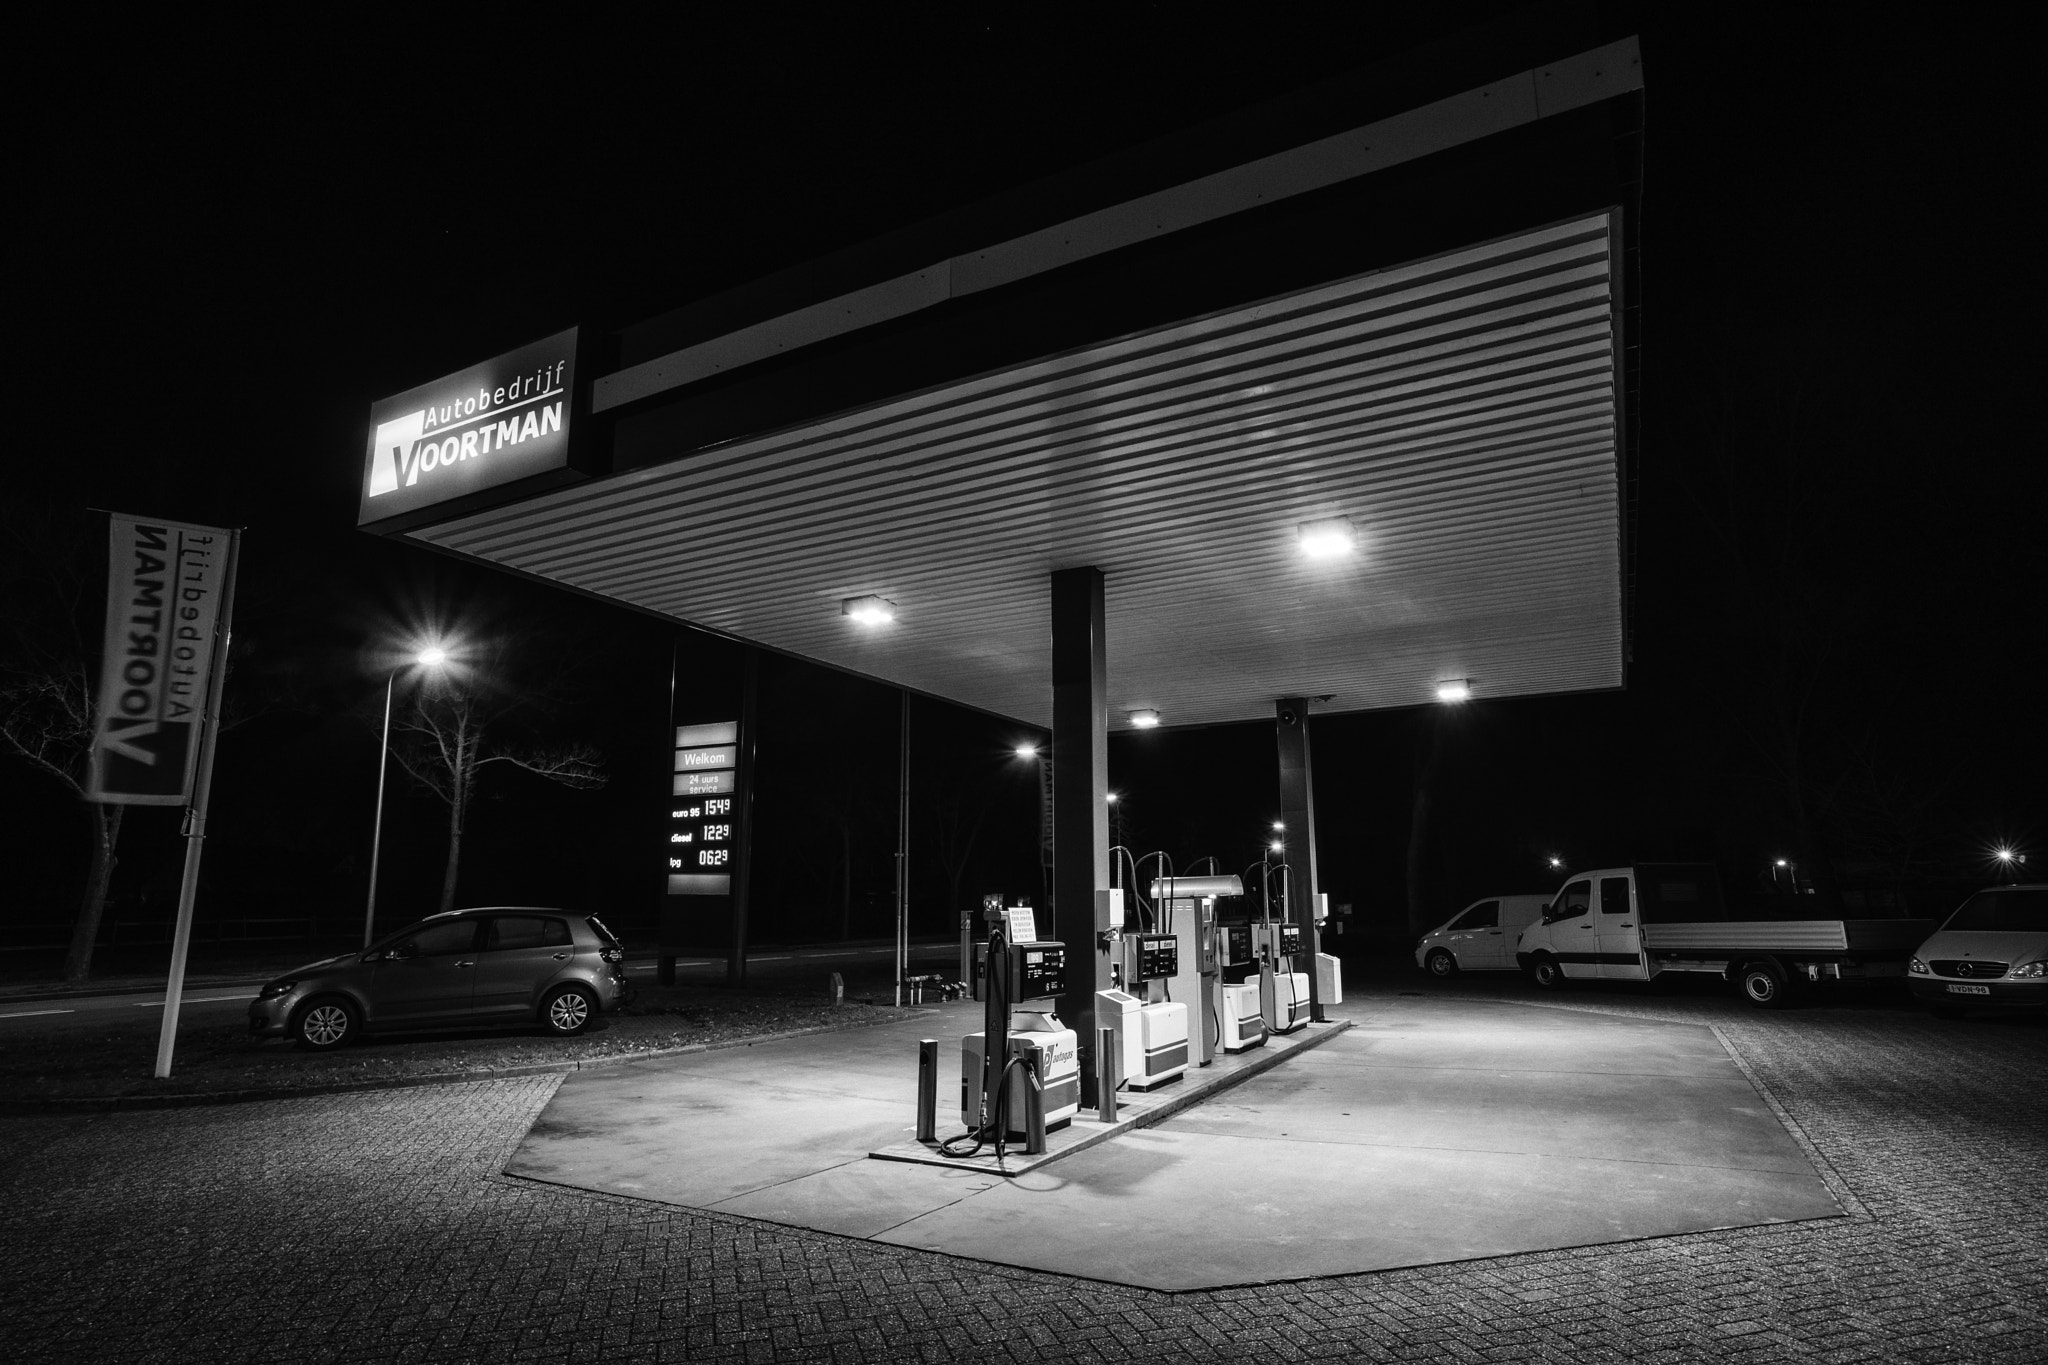 Sony a6300 + ZEISS Touit 12mm F2.8 sample photo. Gas station, daarle, the netherlands photography